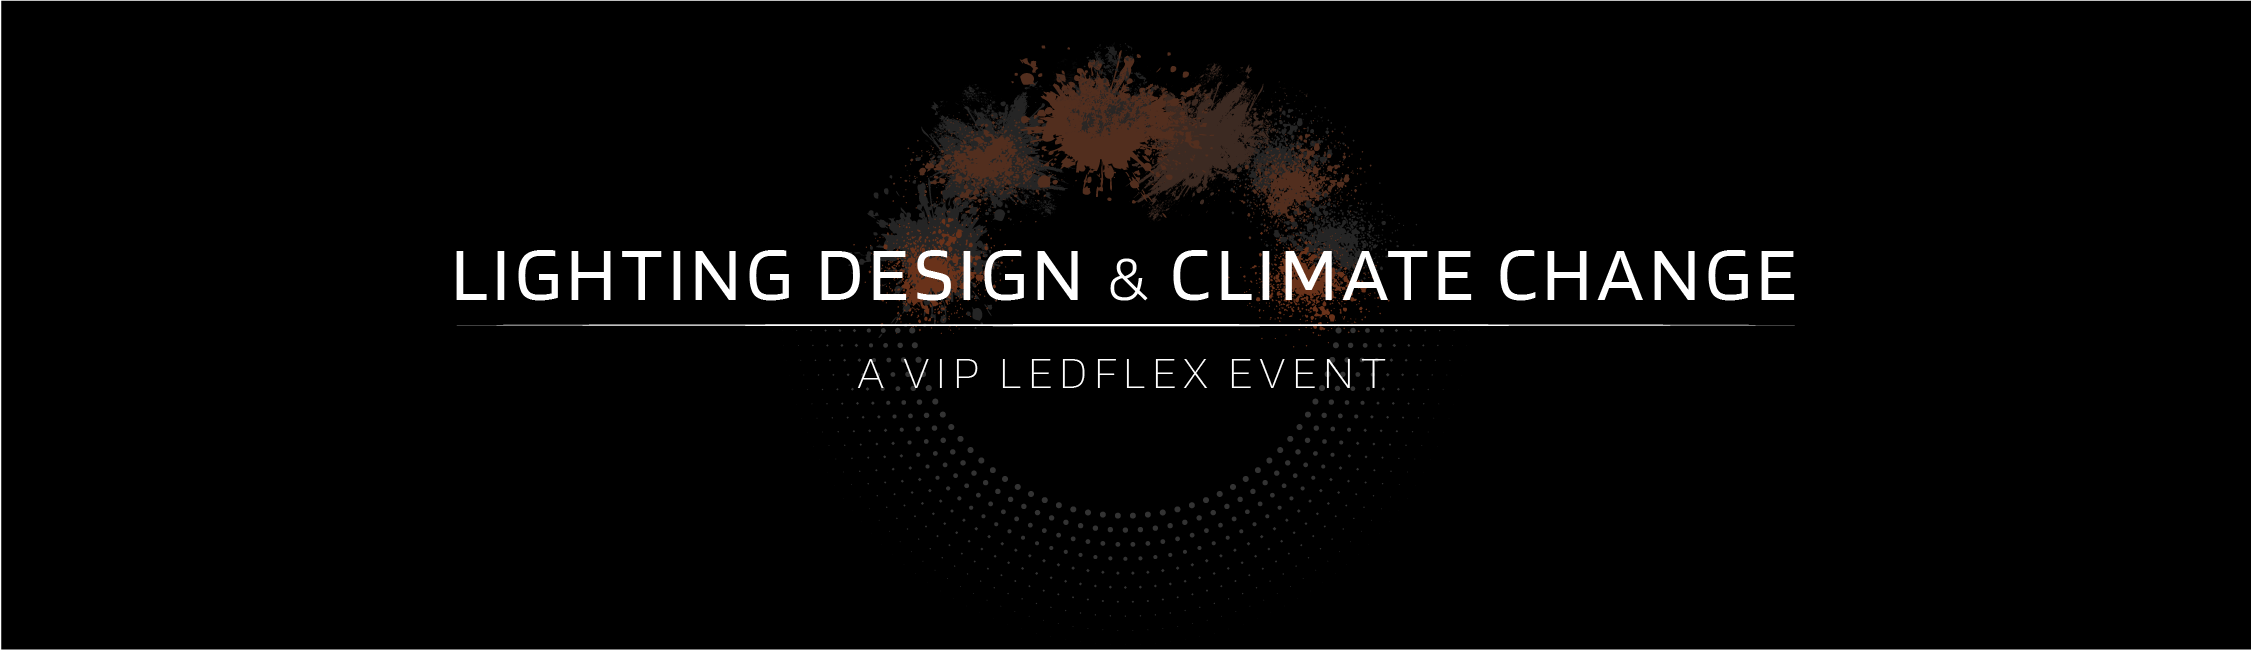 Lighting Design and Climate Change - A VIP LEDFlex Event